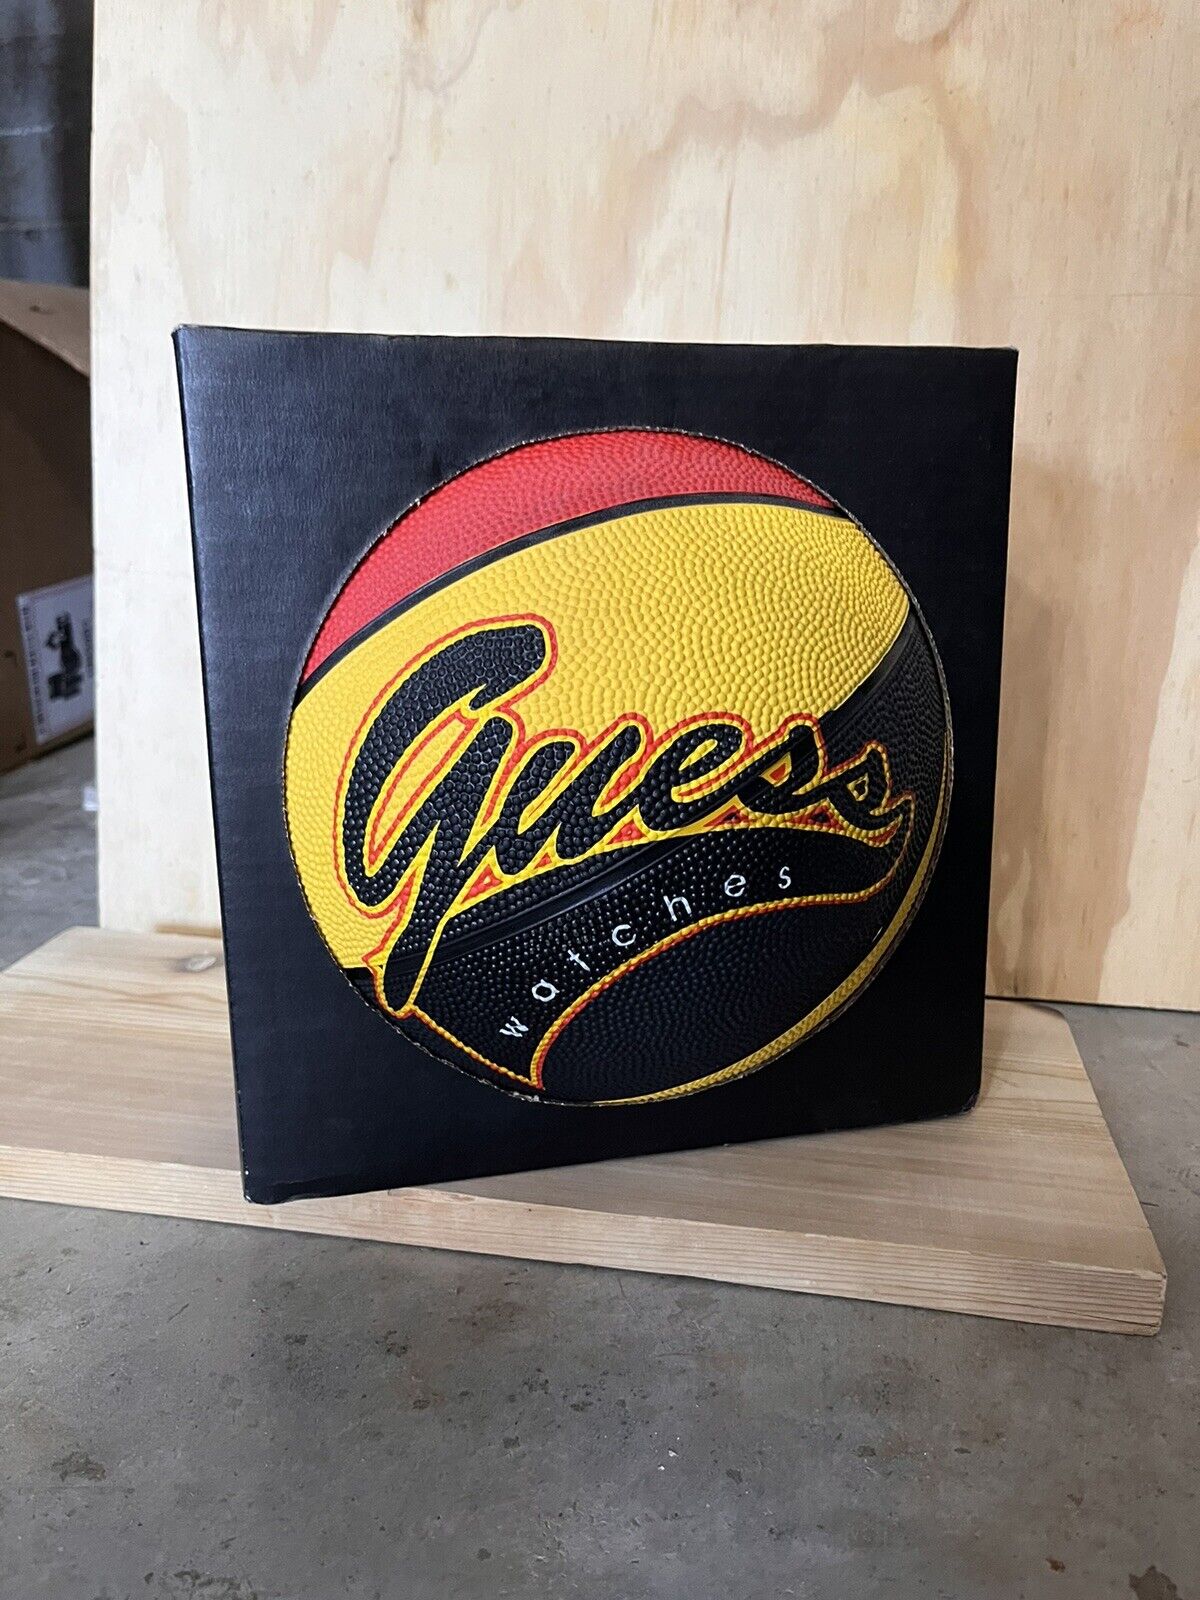 Guess Watches Promo Basketball 1990’s